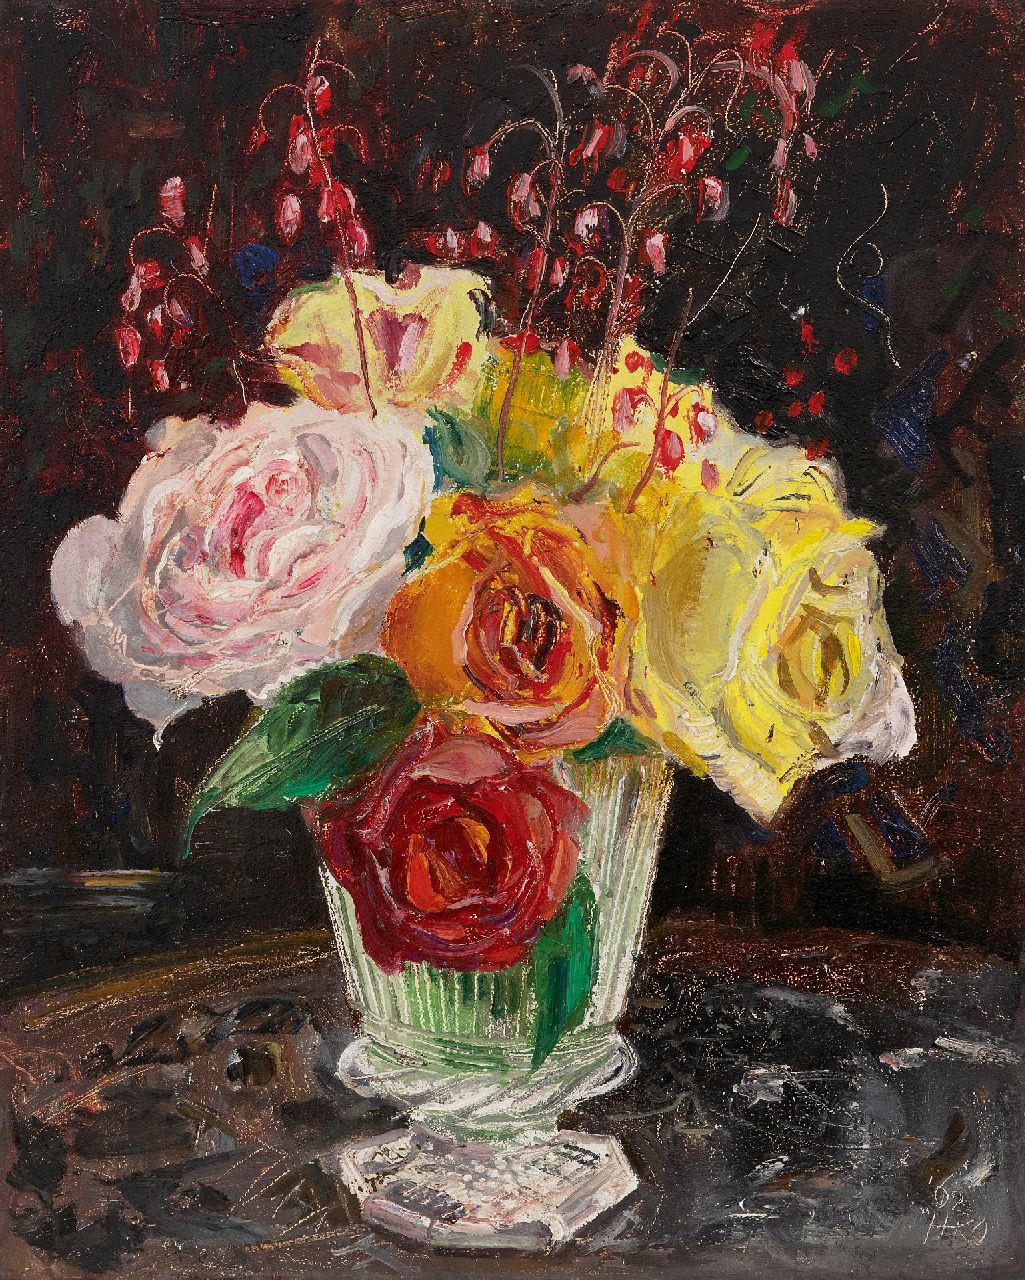 Kamerlingh Onnes H.H.  | 'Harm' Henrick Kamerlingh Onnes | Paintings offered for sale | Roses in a glass vase, oil on board 30.6 x 24.6 cm, signed l.r. with monogram and dated '62